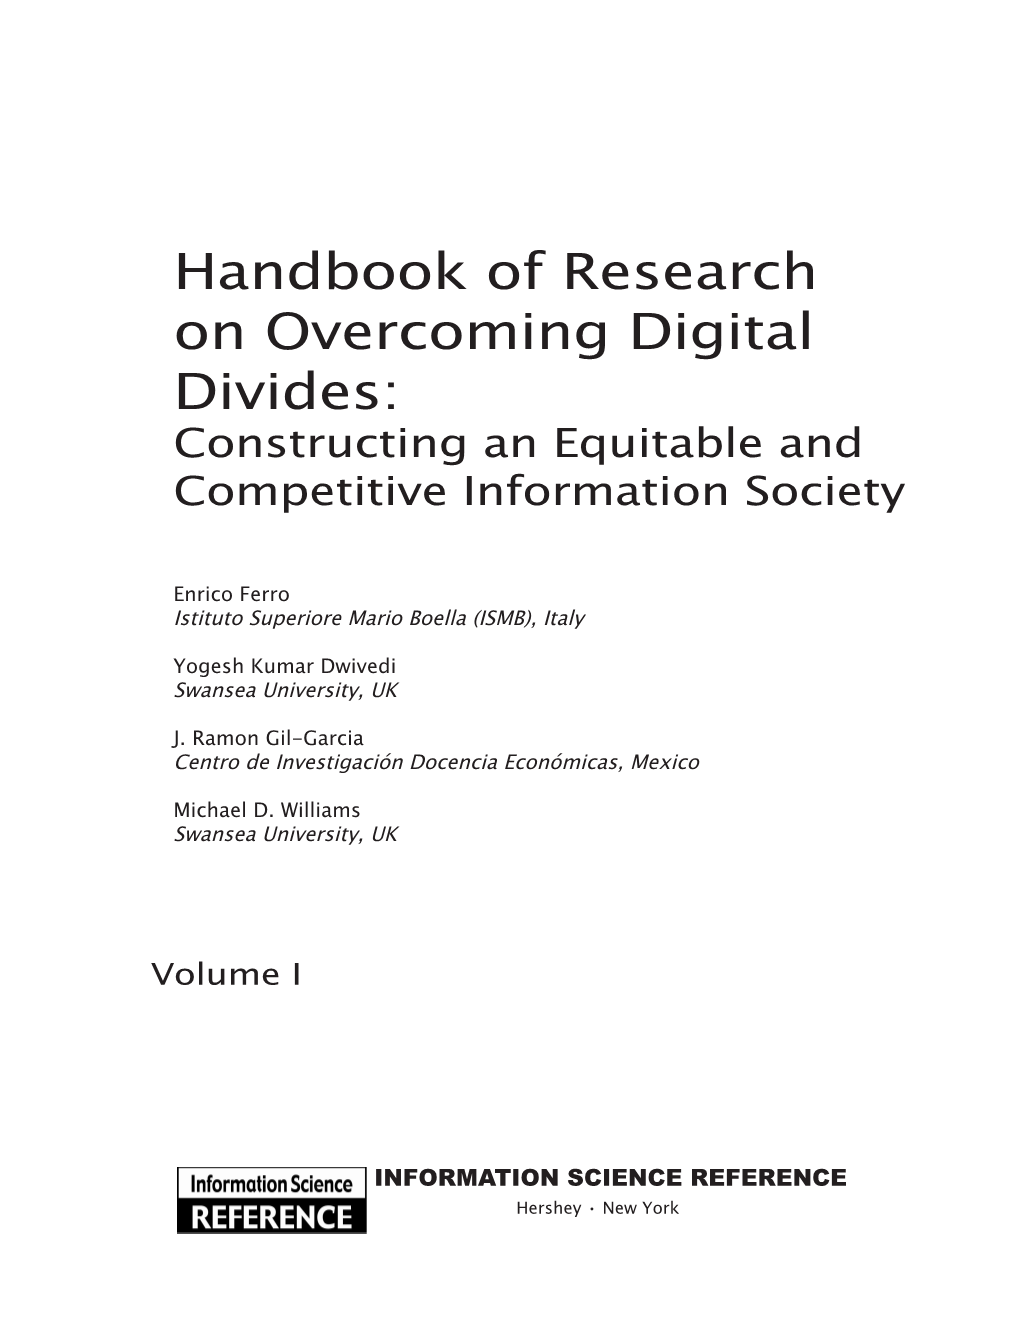 Handbook of Research on Overcoming Digital Divides: Constructing an Equitable and Competitive Information Society